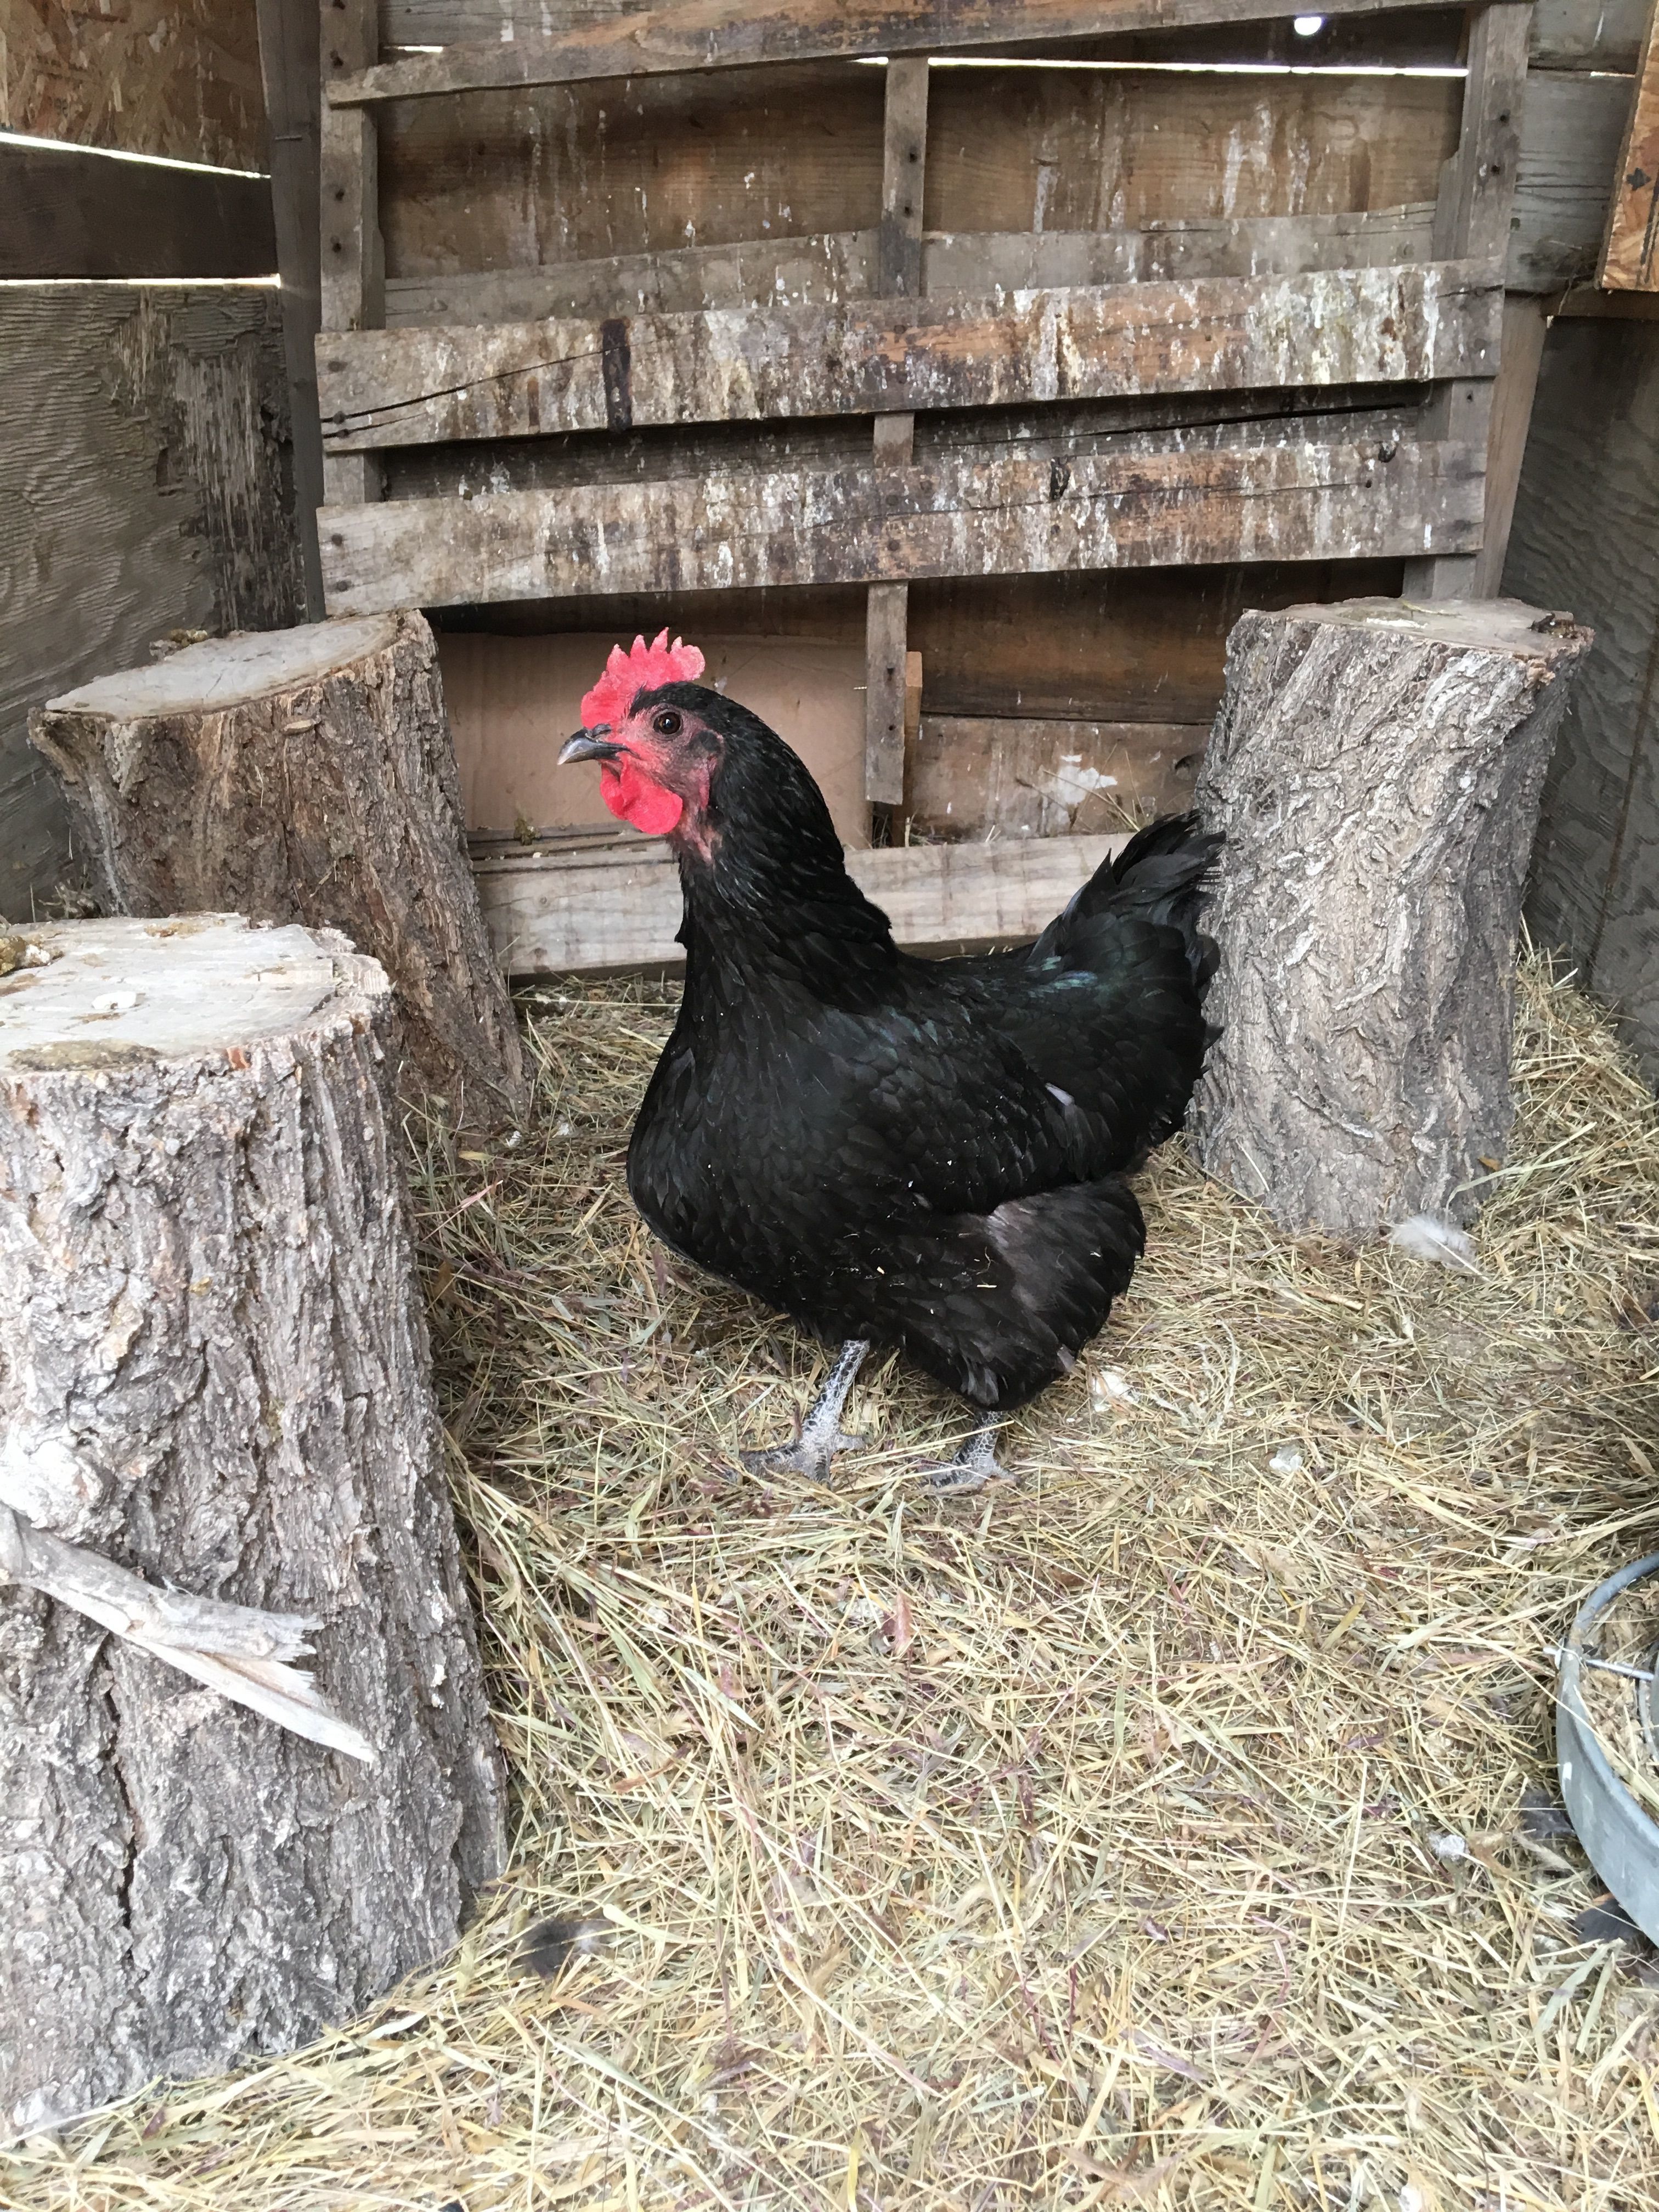 Queen B, Australorp, top of the pecking order